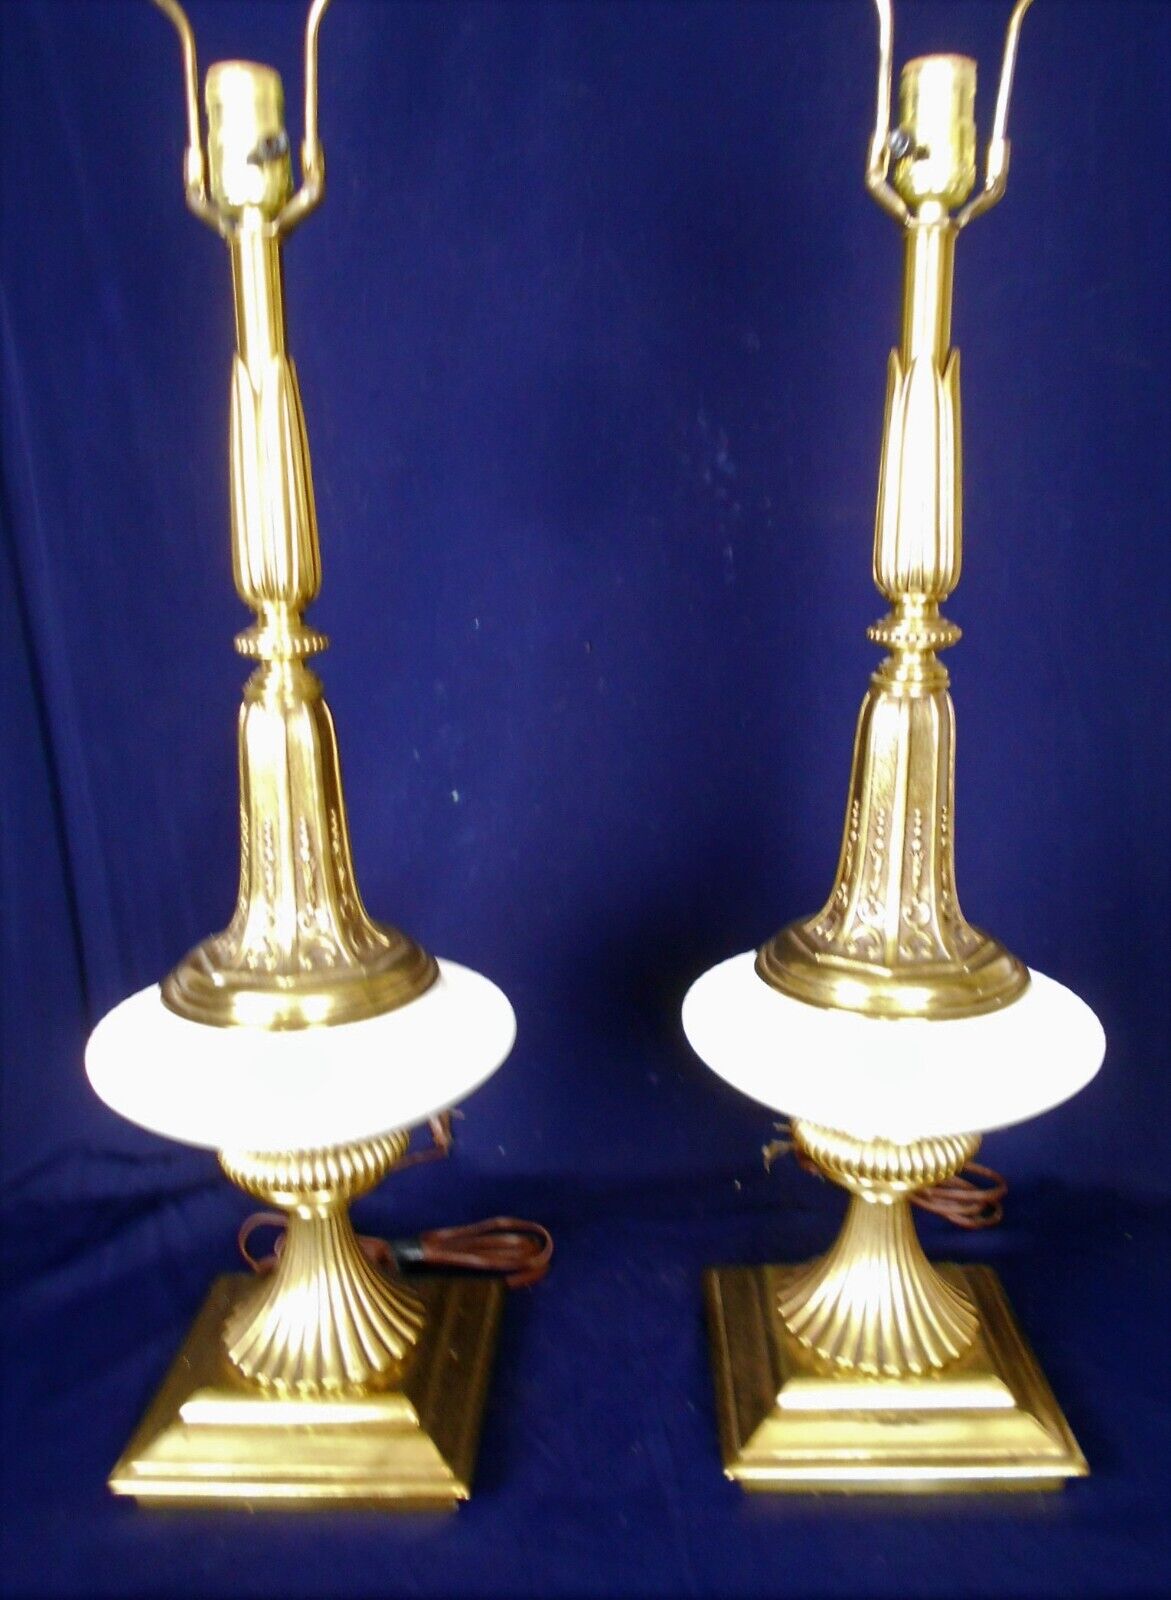 VINTAGE PAIR OF STIFFEL STYLE TABLE LAMPS